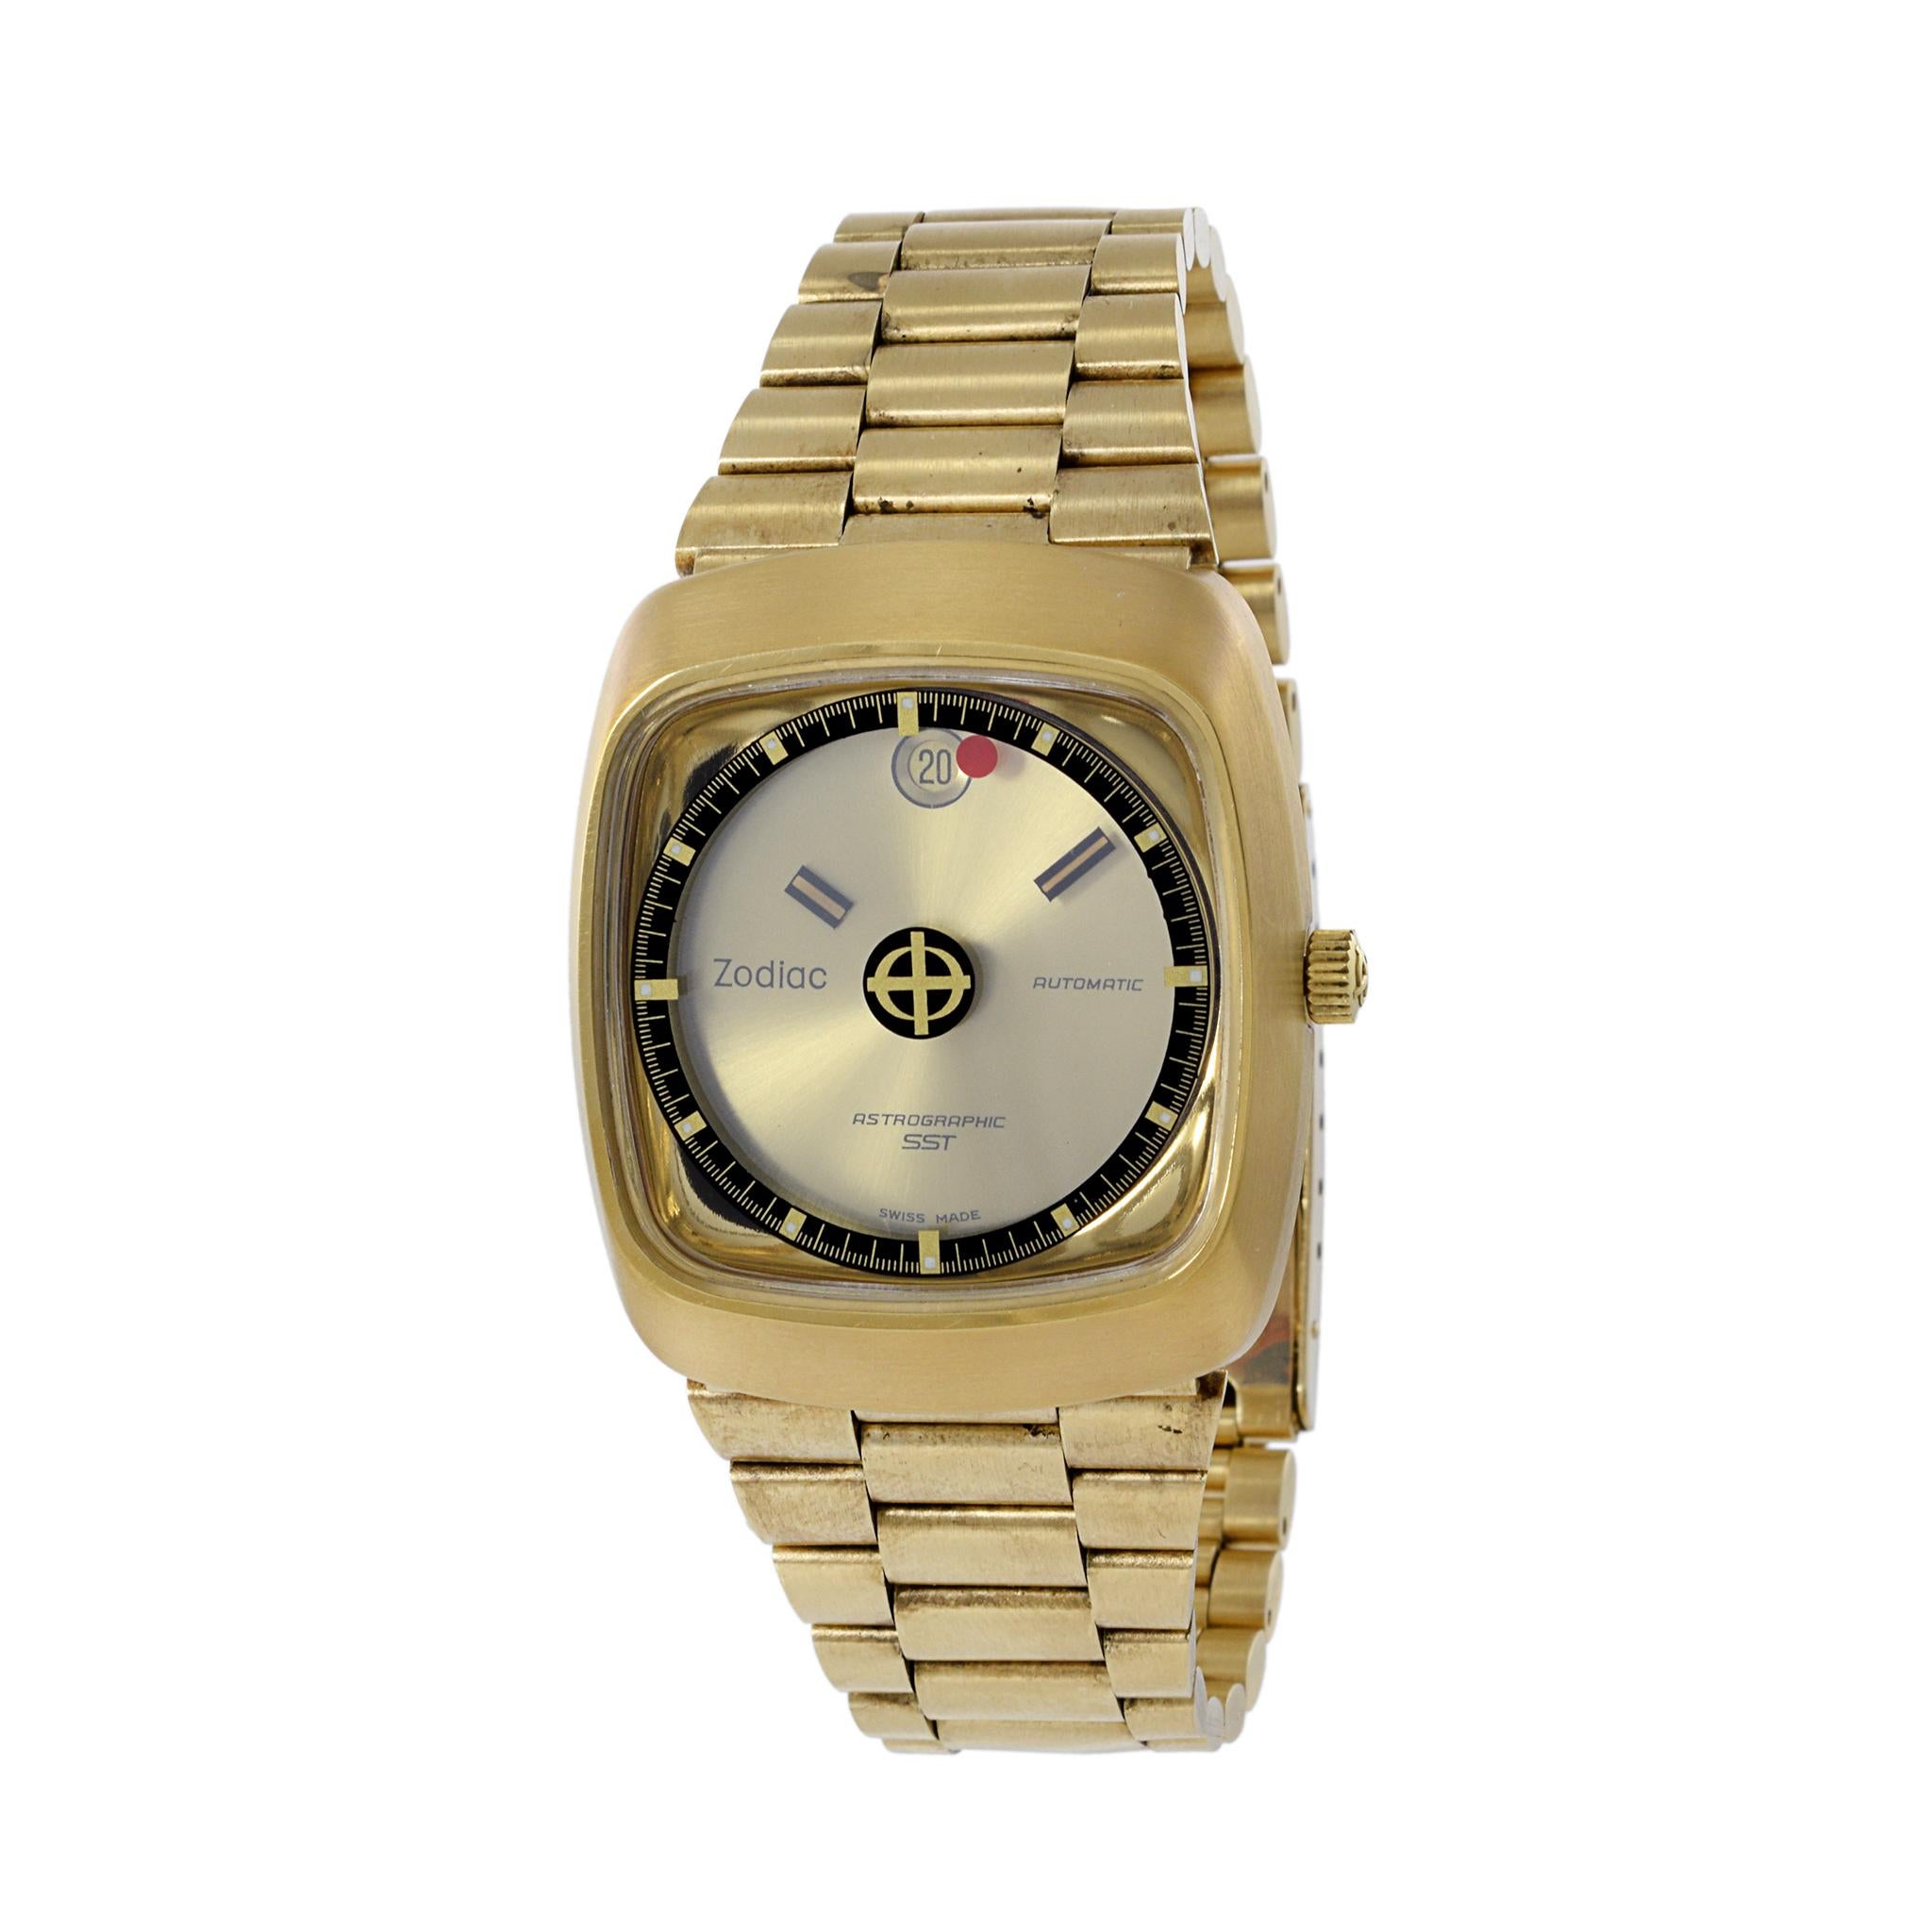 This is a NOS condition 1971 Zodiac Astrographic SST TV Case watch. This watch comes as a complete set including inner and outer boxes, booklets, and original hangtags!

The case of the watch is gold plate and 35mm wide and 41mm lug to lug. It is in